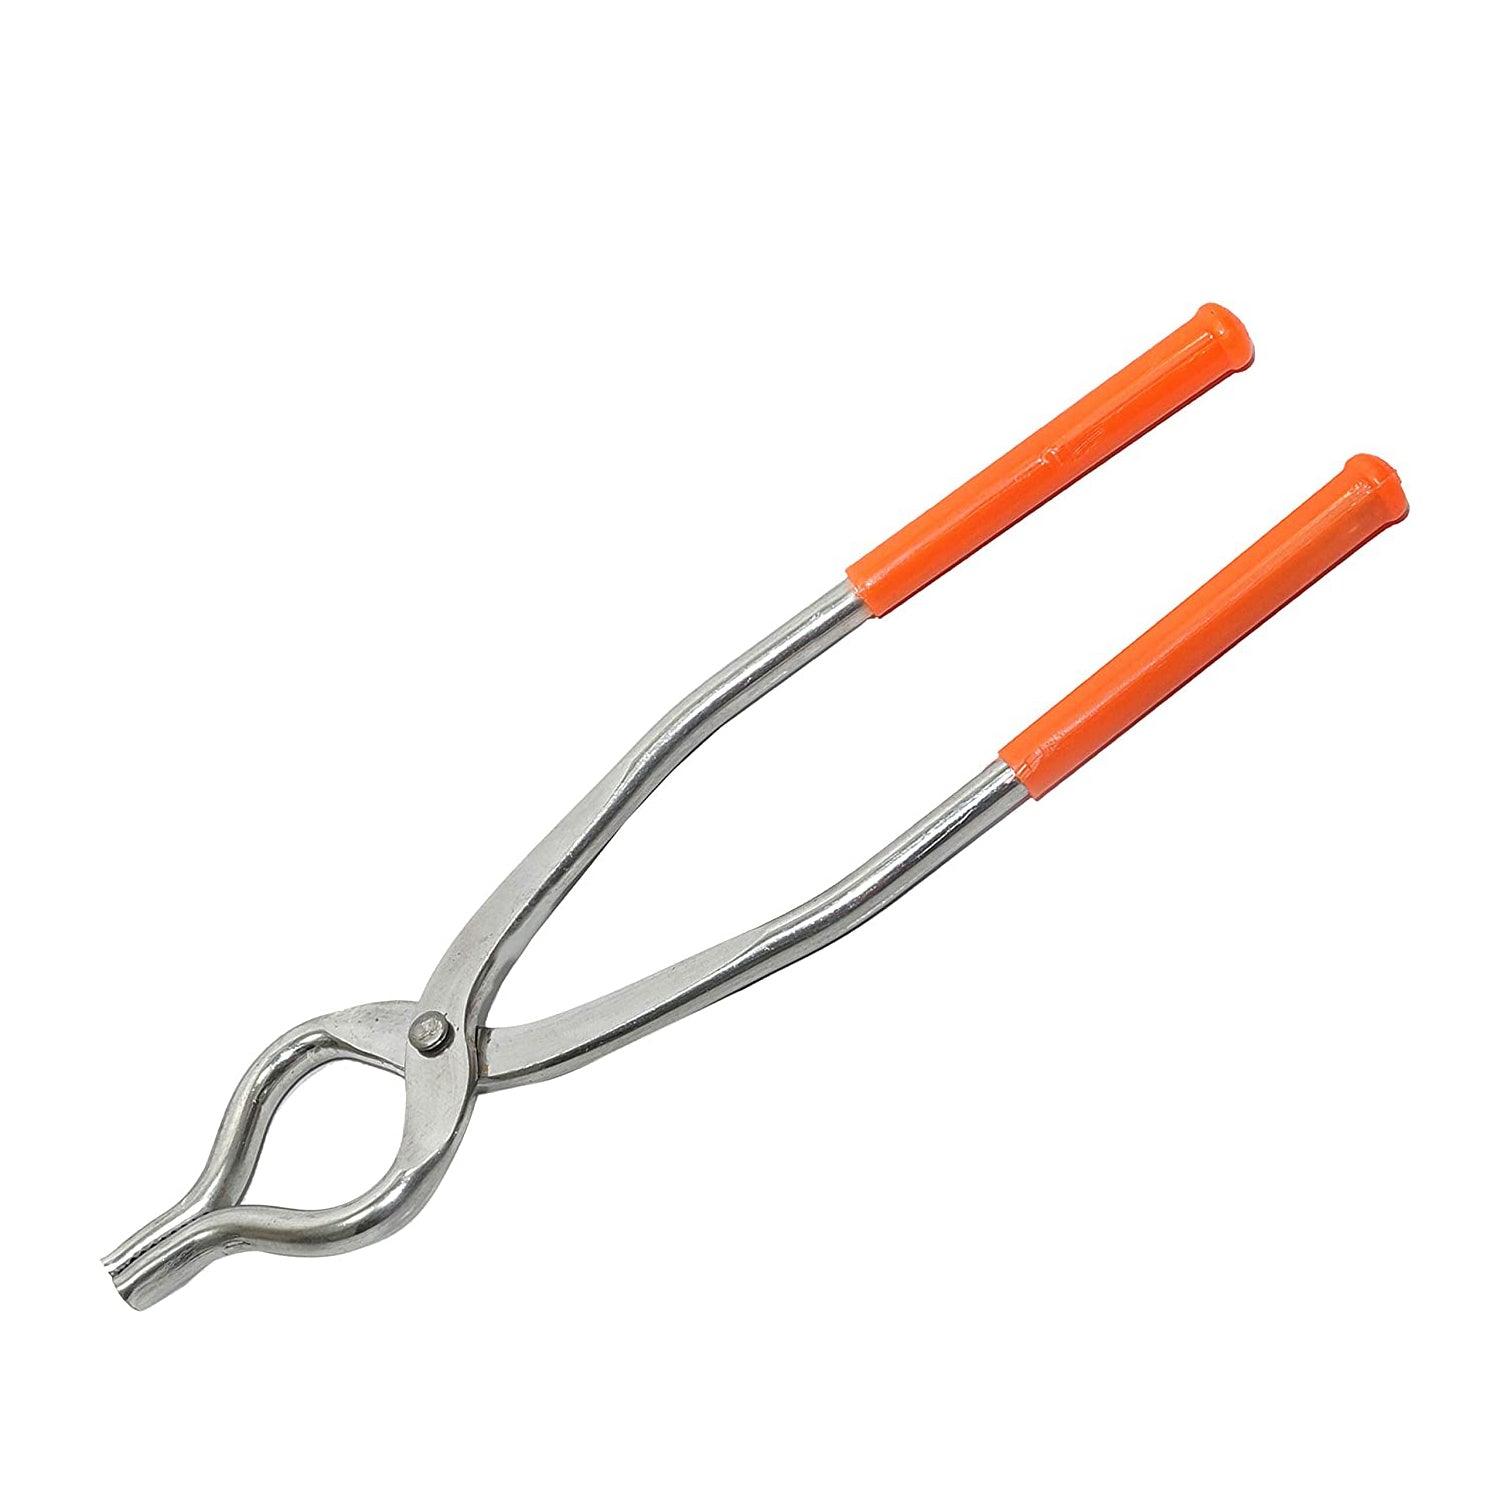 Multipurpose Stainless Steel Pakkad/Gripper/Lifter Holders For Kitchen Cooking (Silver and Orange) - Walgrow.com